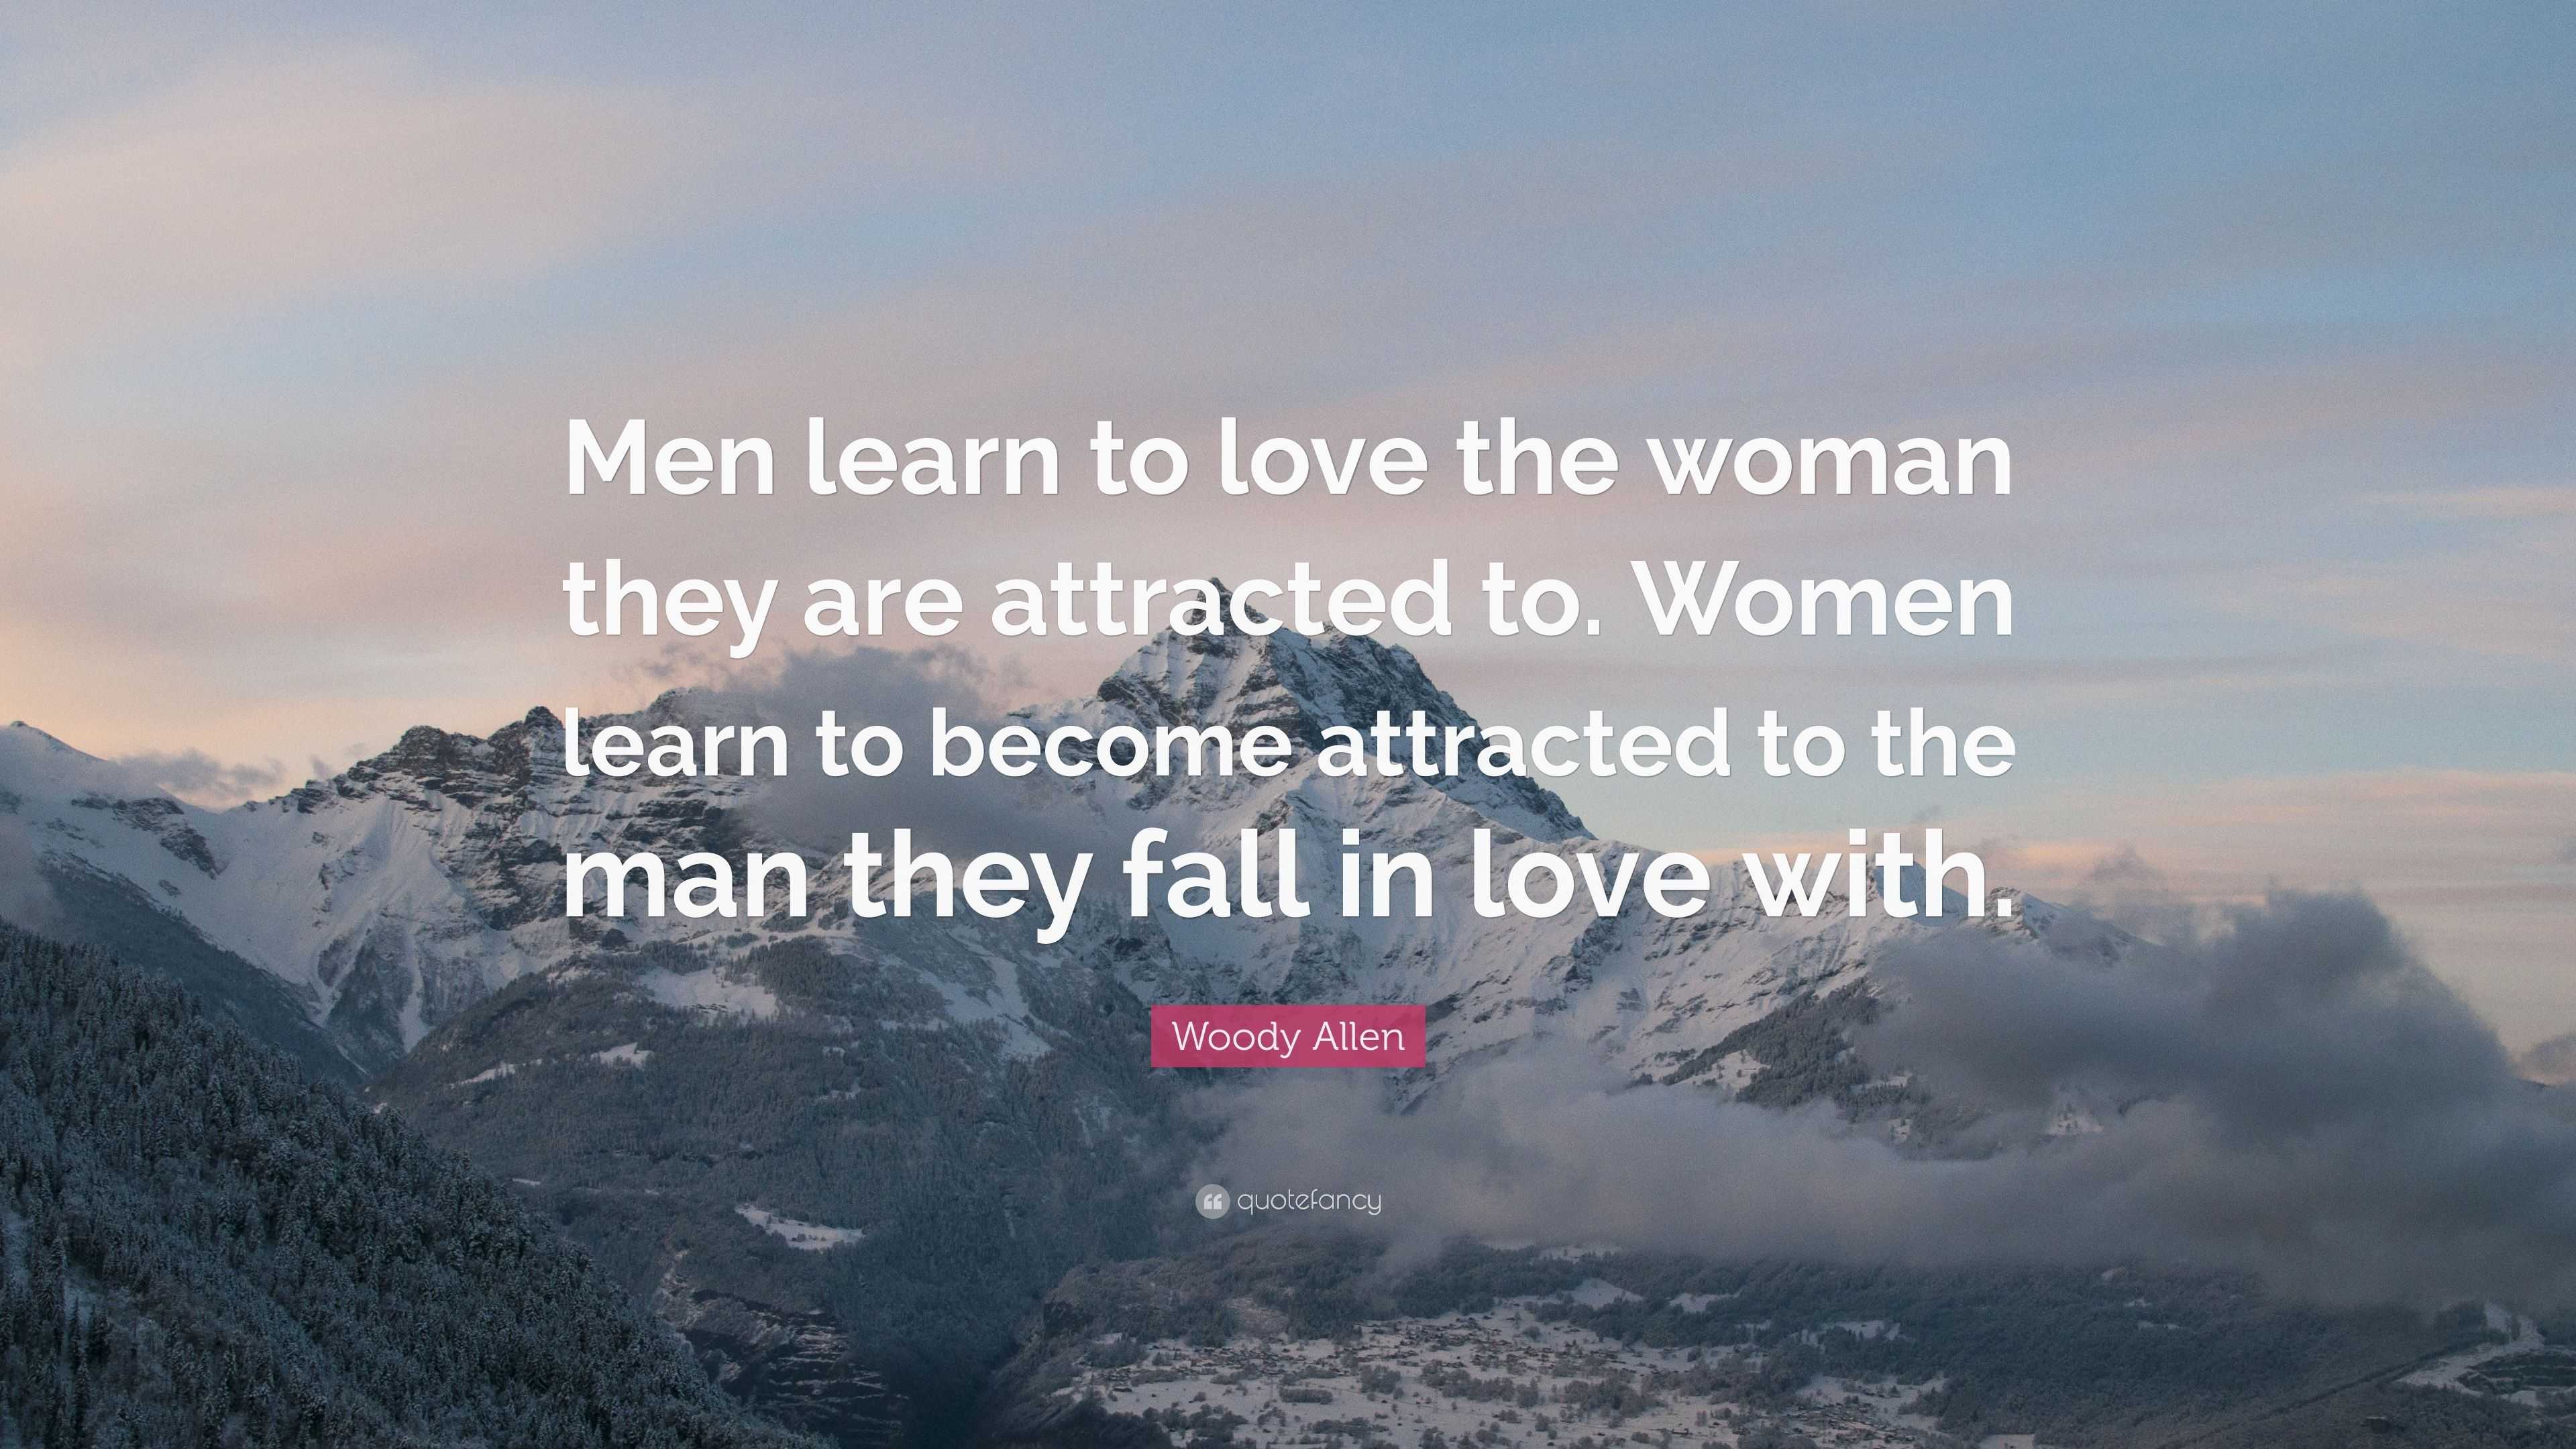 Woody Allen Quote: “Men learn to love the woman they are attracted to ...